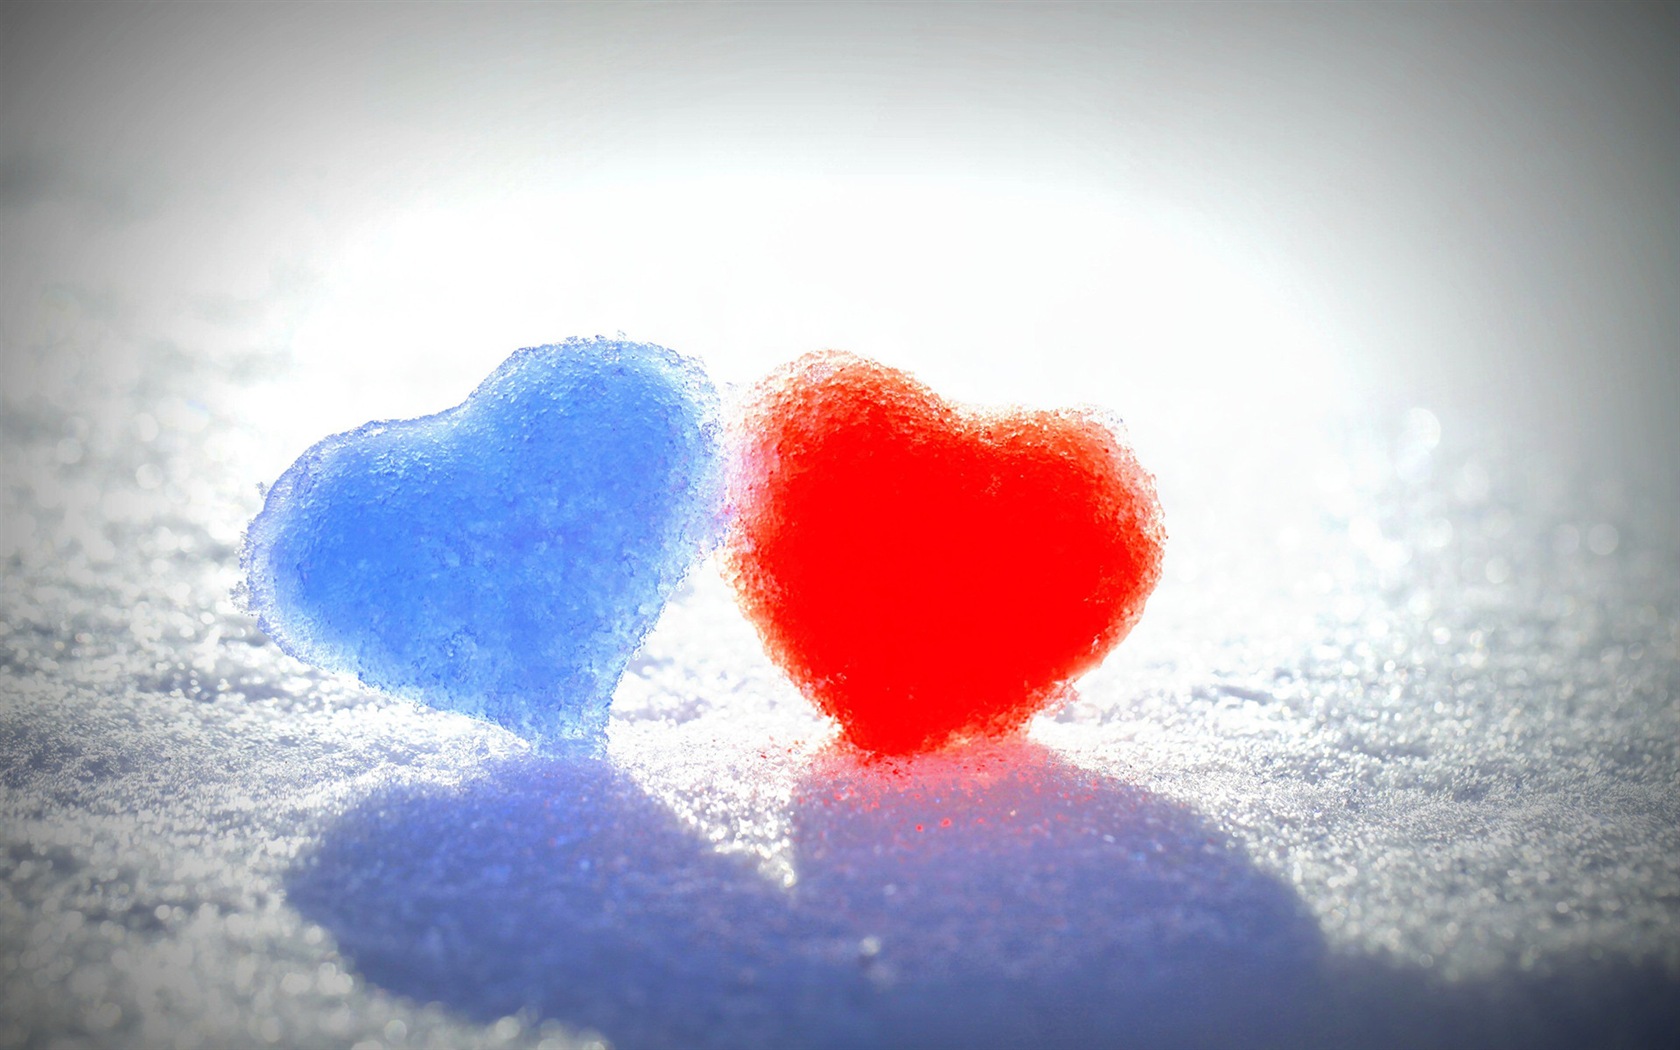 The theme of love, creative heart-shaped HD wallpapers #13 - 1680x1050